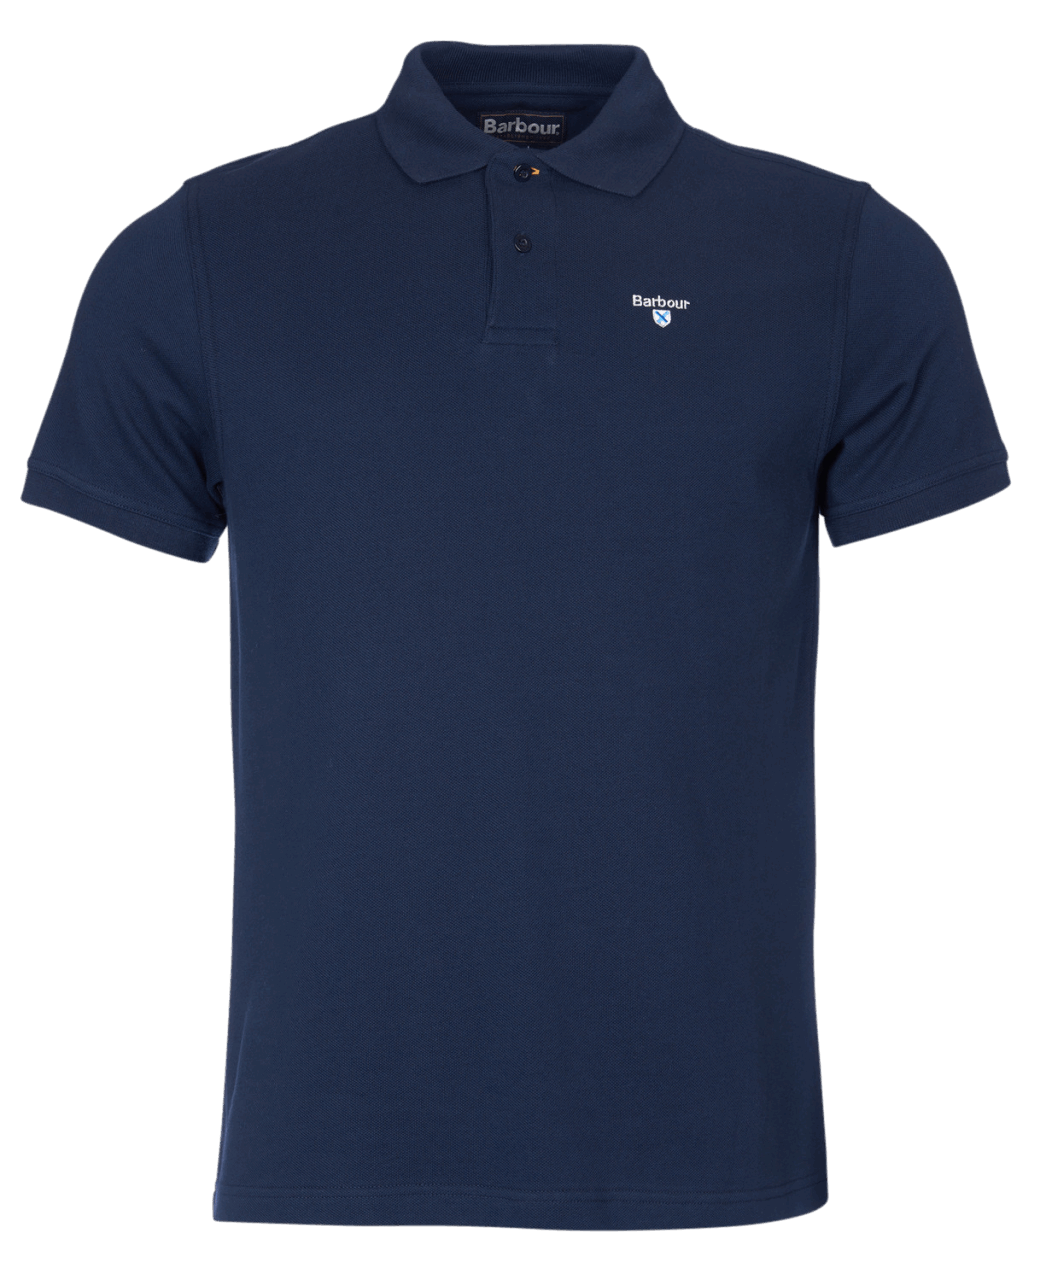 Barbour Sports Polo - new navy